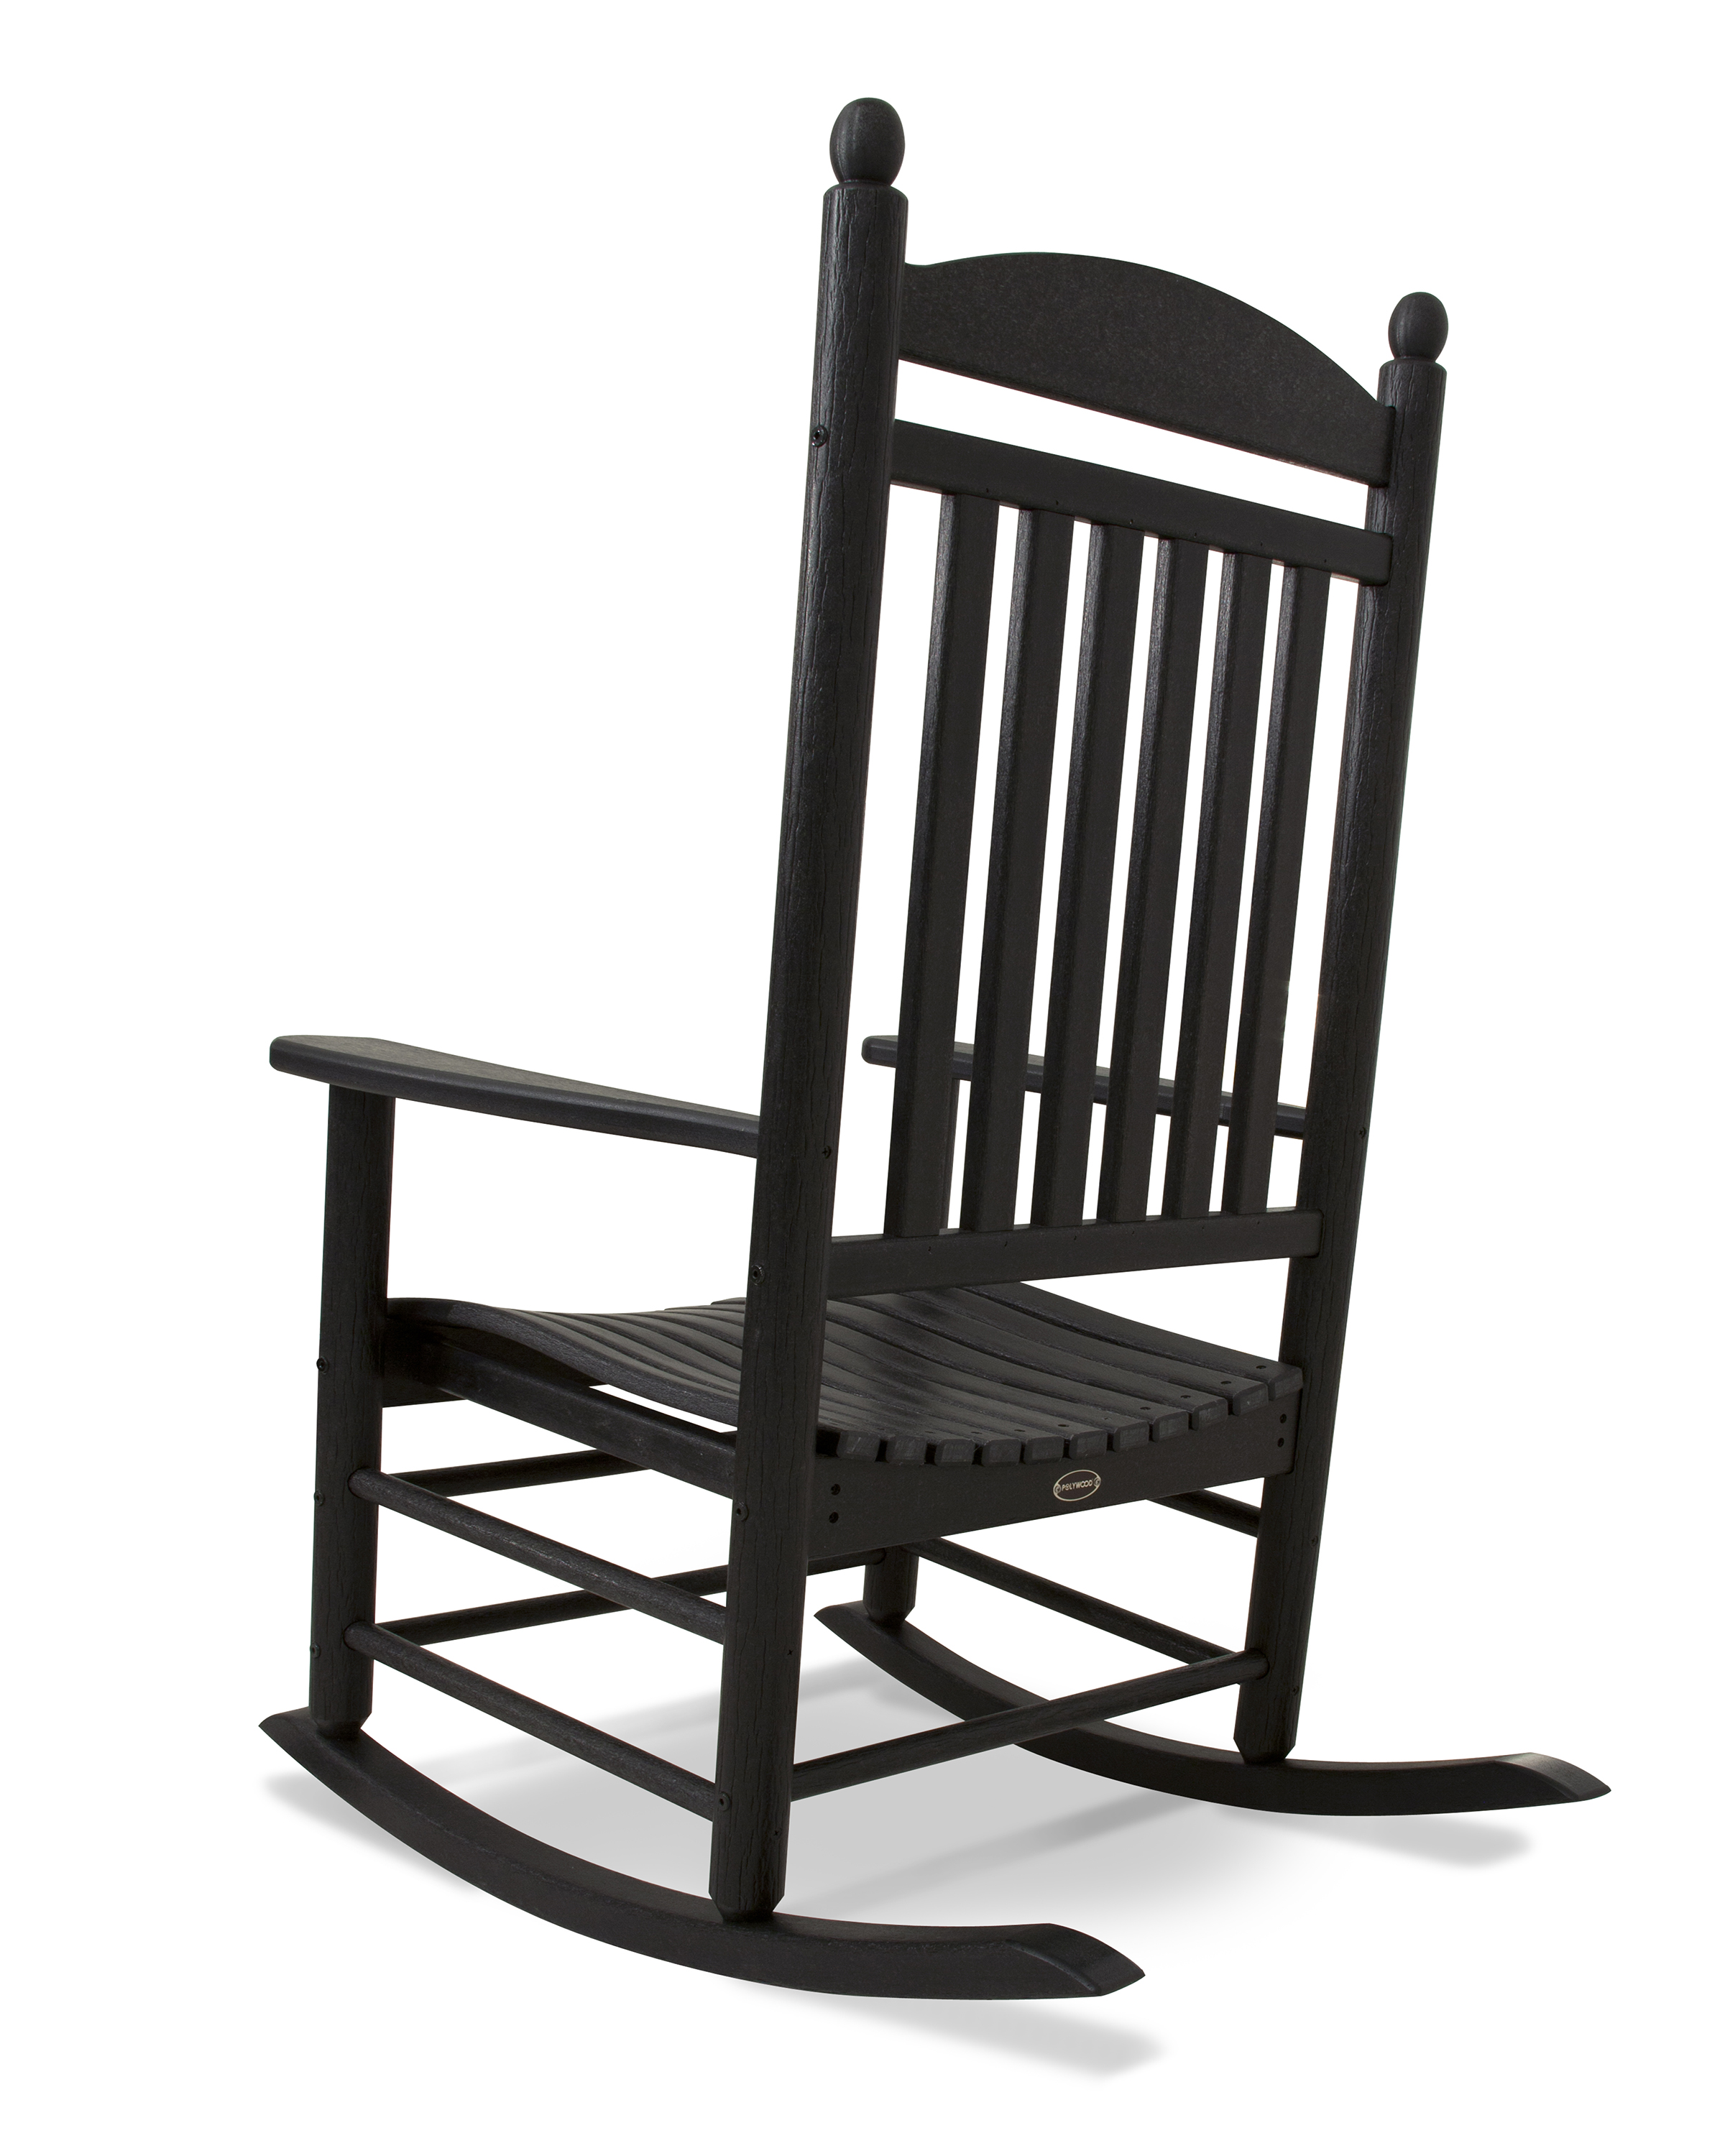 This Traditional Rocker Is Enhanced With Unique Detailing That Gives It Both Warmth And Sophistication. Polywood Furniture Is Constructed Of Solid Polywood Lumber That